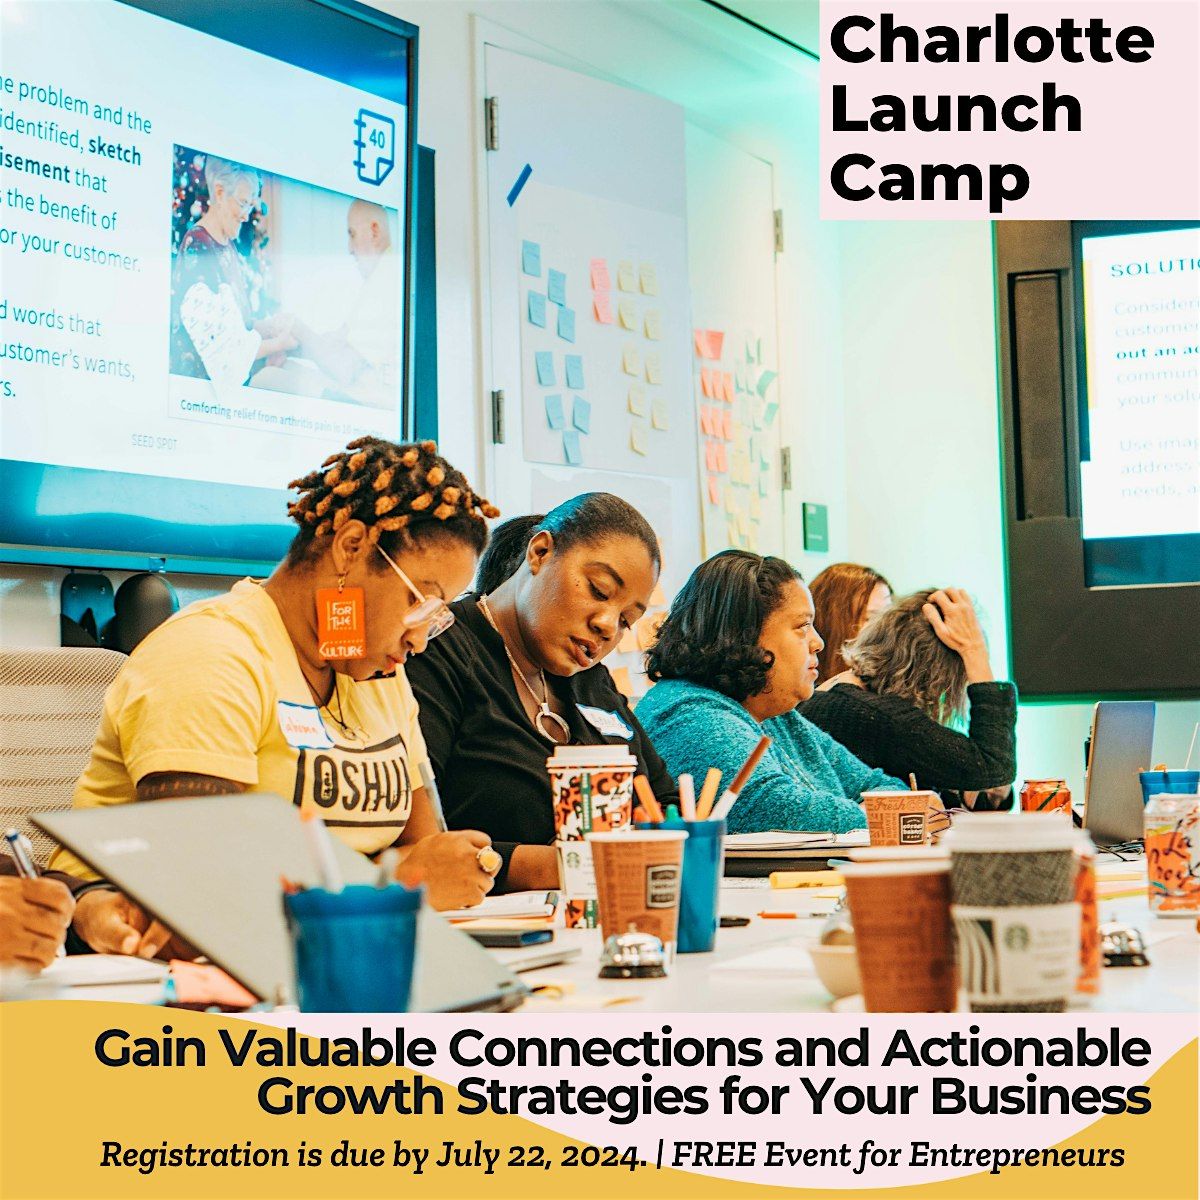 Charlotte Launch Camp